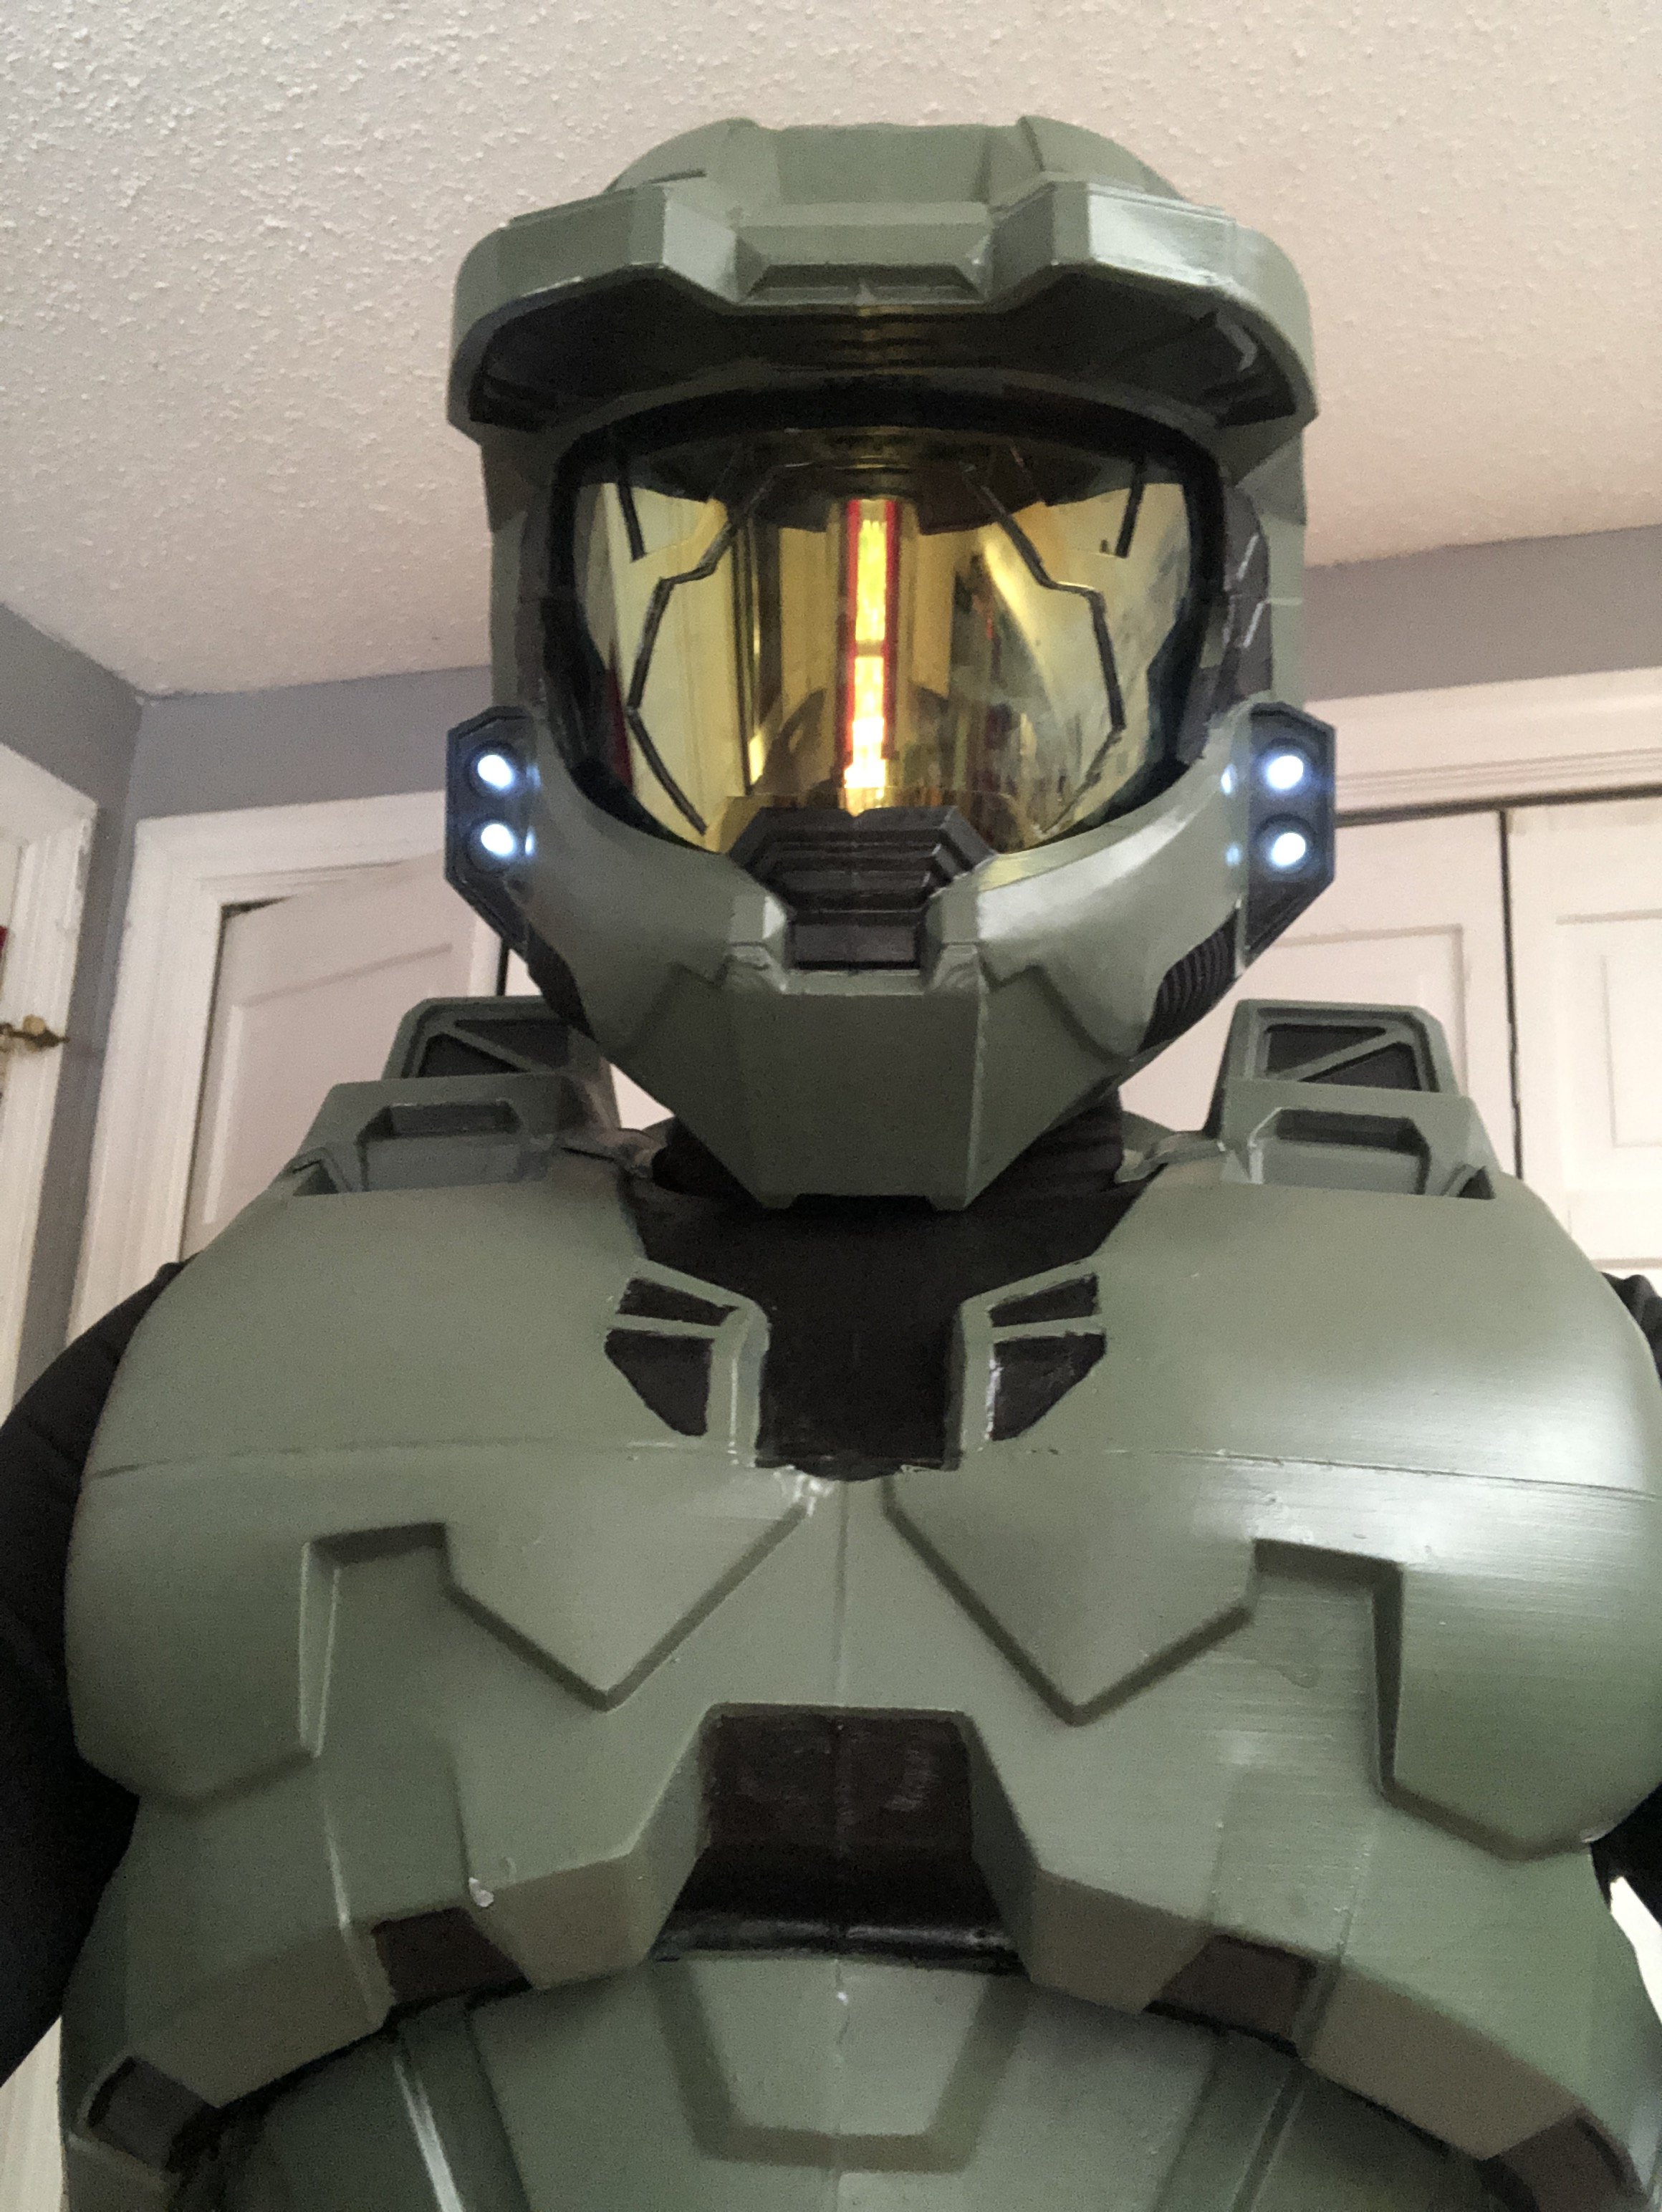 My First Build Halo 3 Master Chief Page 3 Halo Costume And Prop